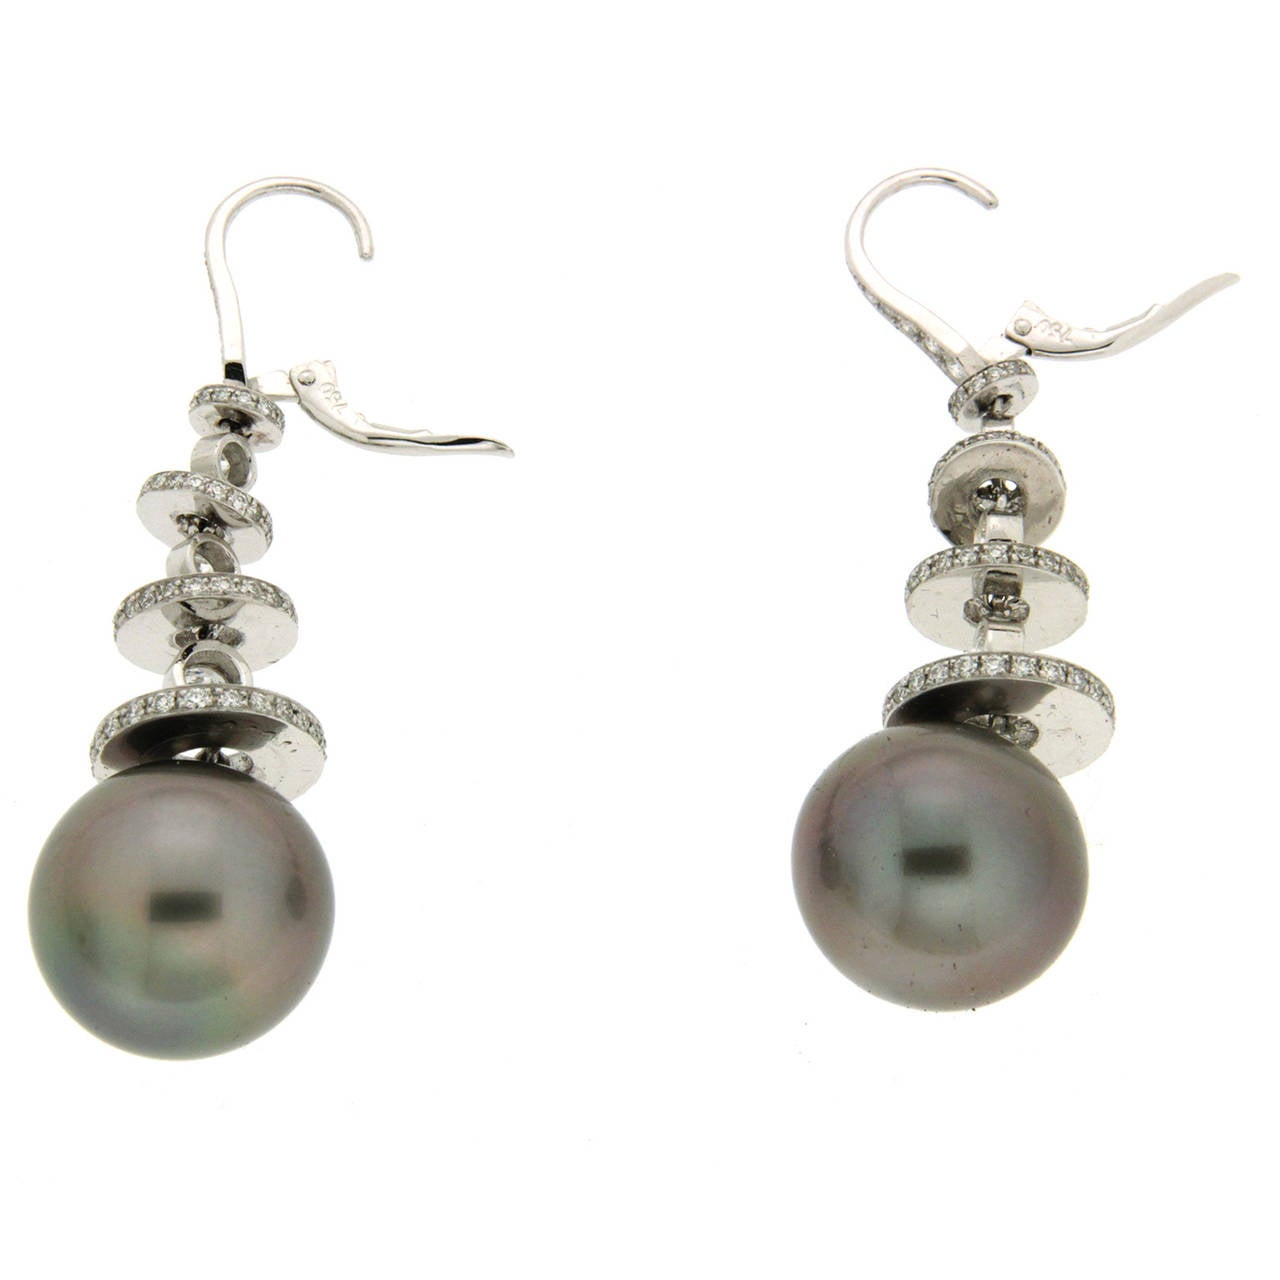 Pave Disks with Round Brilliant Diamonds in between and 16.3mm Tahitian Pearls at the bottom.